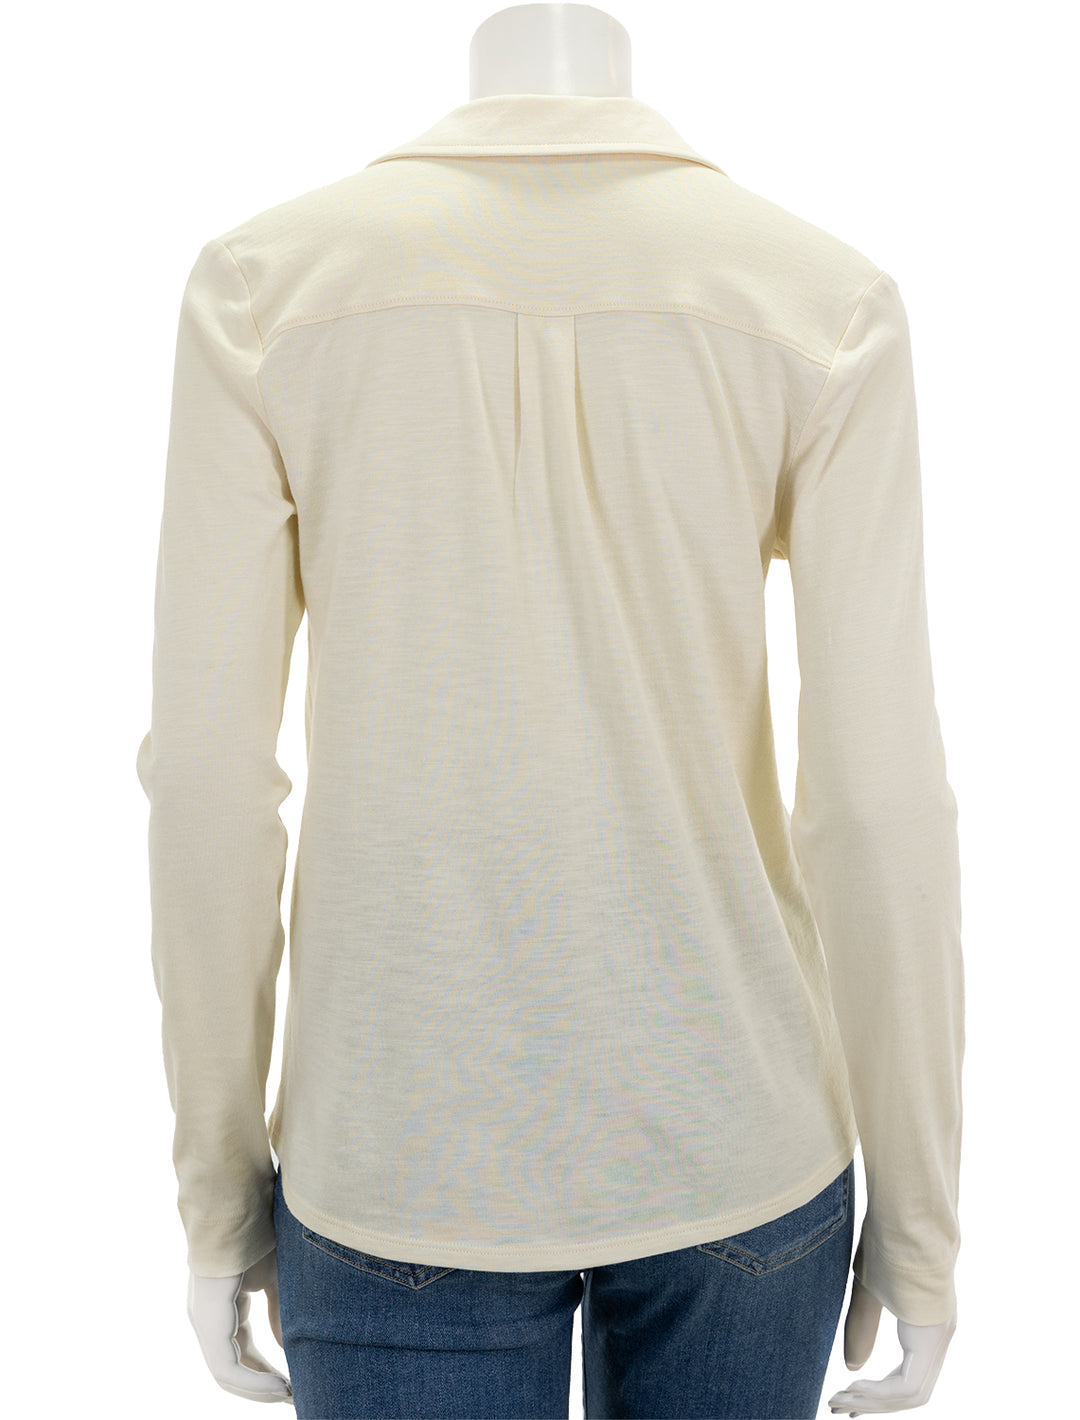 Back view of Lilla P.'s long sleeve buttondown tee in talc.